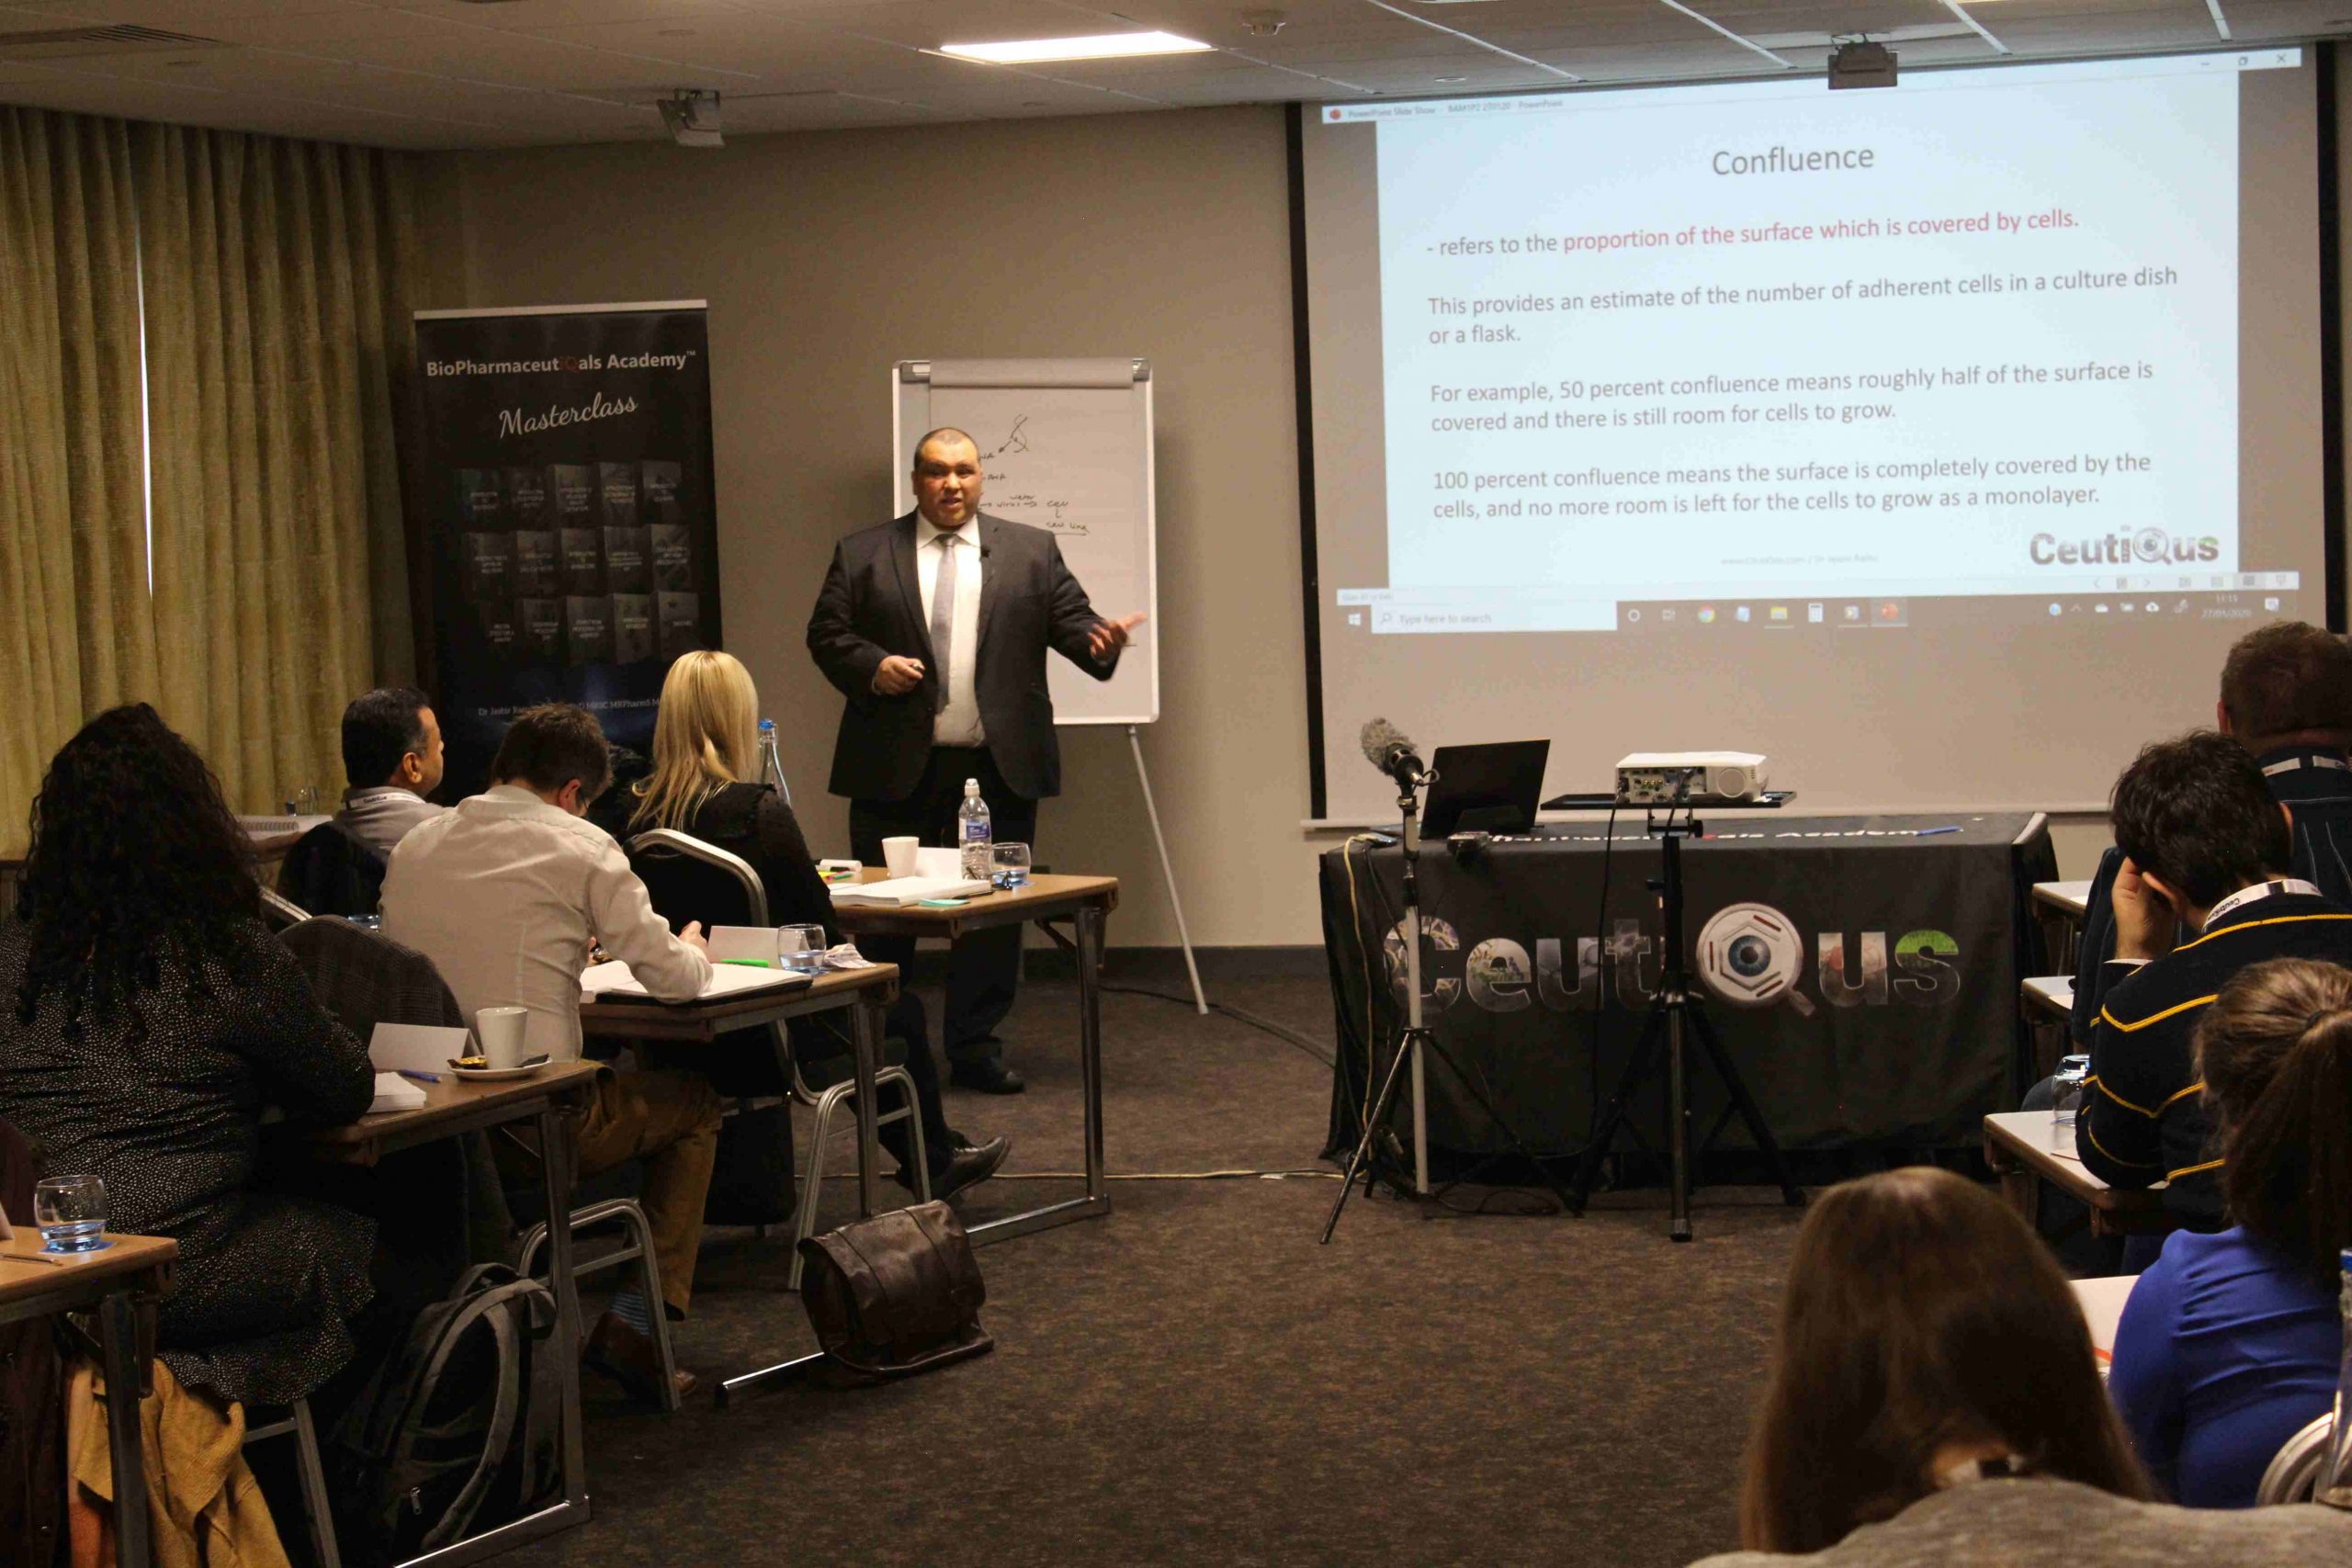 Cell and gene therapy and biologics training and education by Dr Jasbir Rattu at CeutiQus BAM